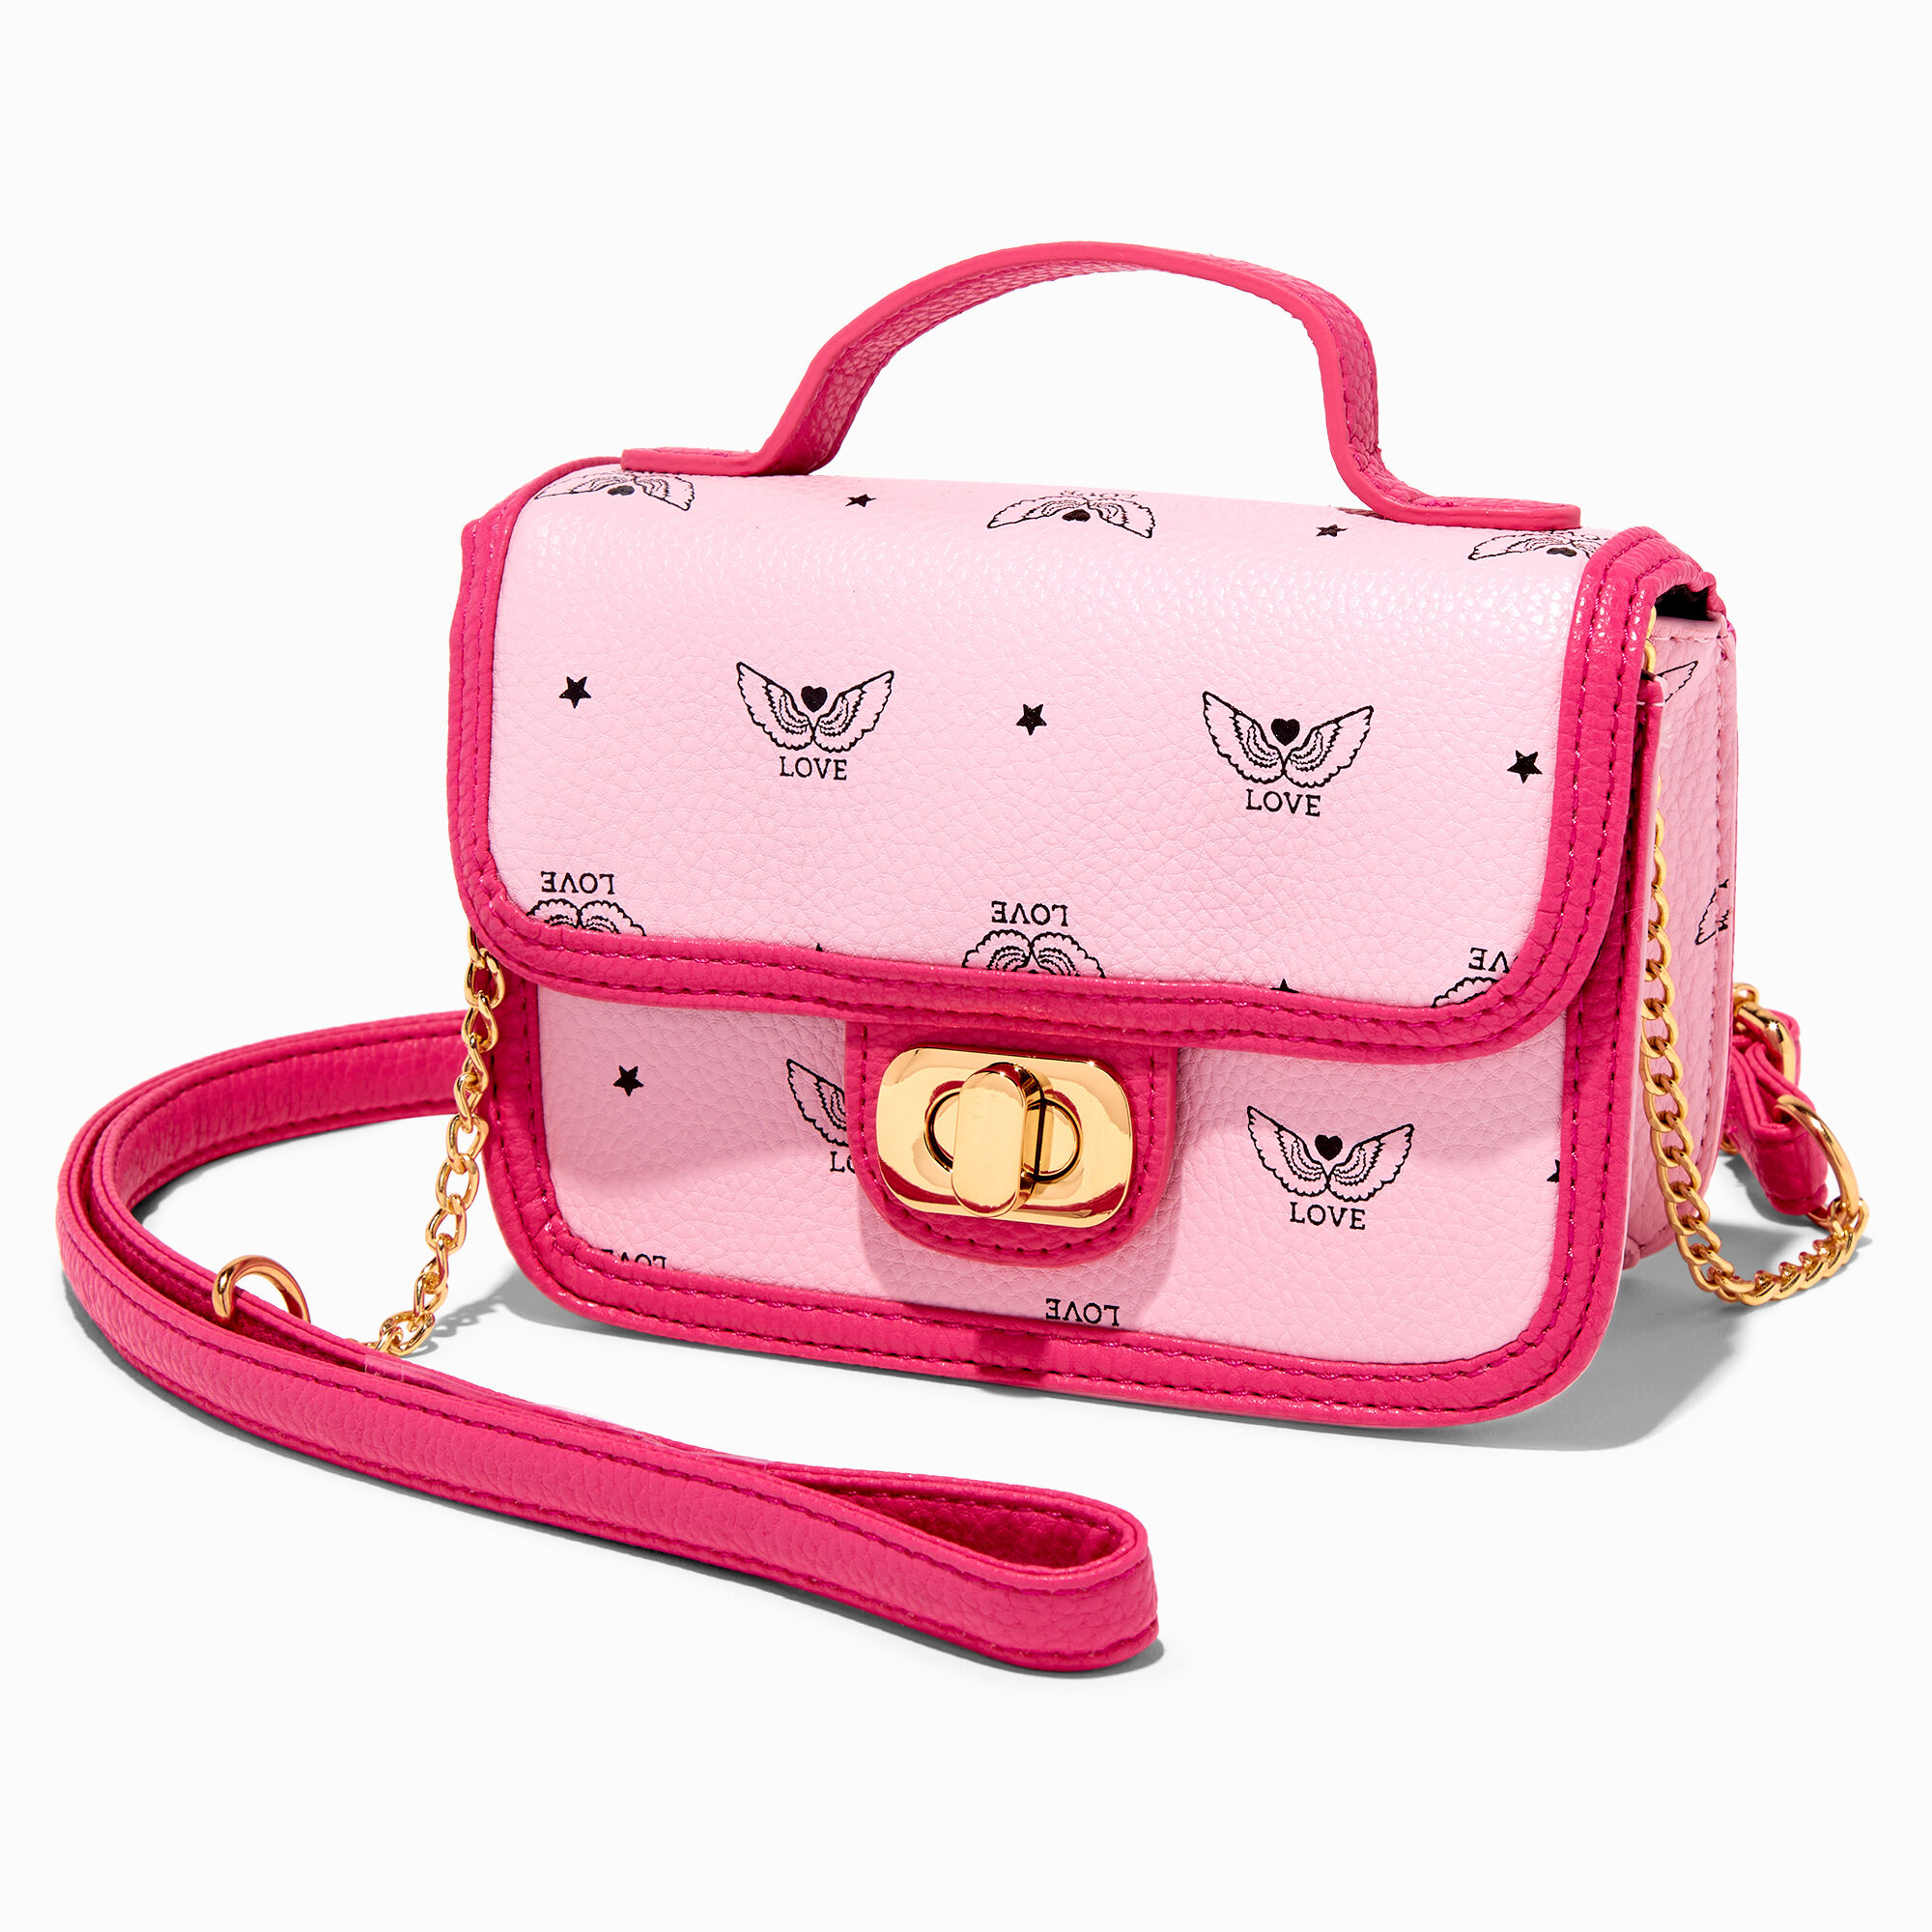 View Claires Love Angel Wings Crossbody Bag Pink information